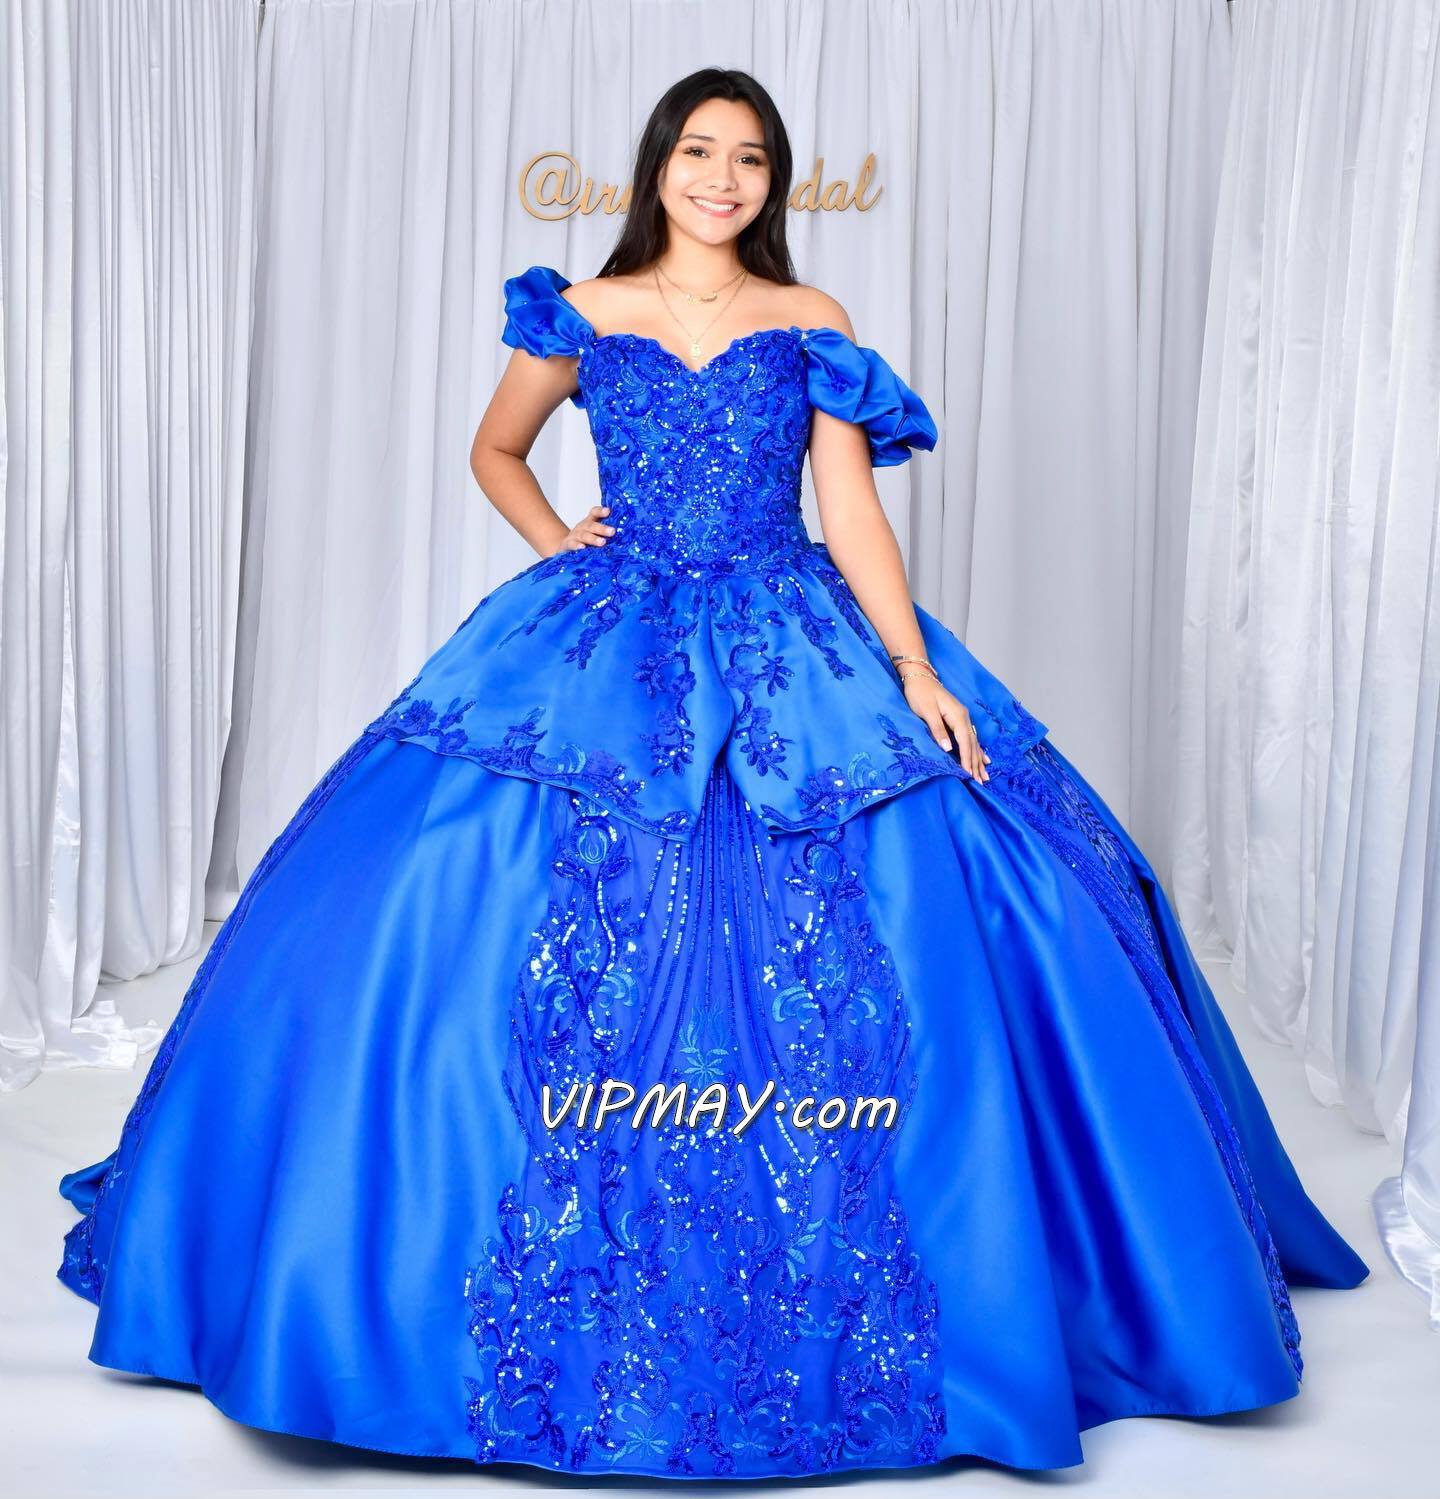 royal blue sweet 16 dress,royal blue quinceanera dress,sequin ball gown charro quinceanera dress,sequined quinceanera dress,quinceanera dress satin layers,cap sleeves quinceanera dress,quinceanera dress with a train,sparkly quinceanera dress,sweetheart sweet sixteen dress,sweetheart neckline quinceanera dress,wholesale quinceanera dress from china,quinceanera dress discount prices,modest and elegant quinceanera dress,quinceanera dress free shipping,